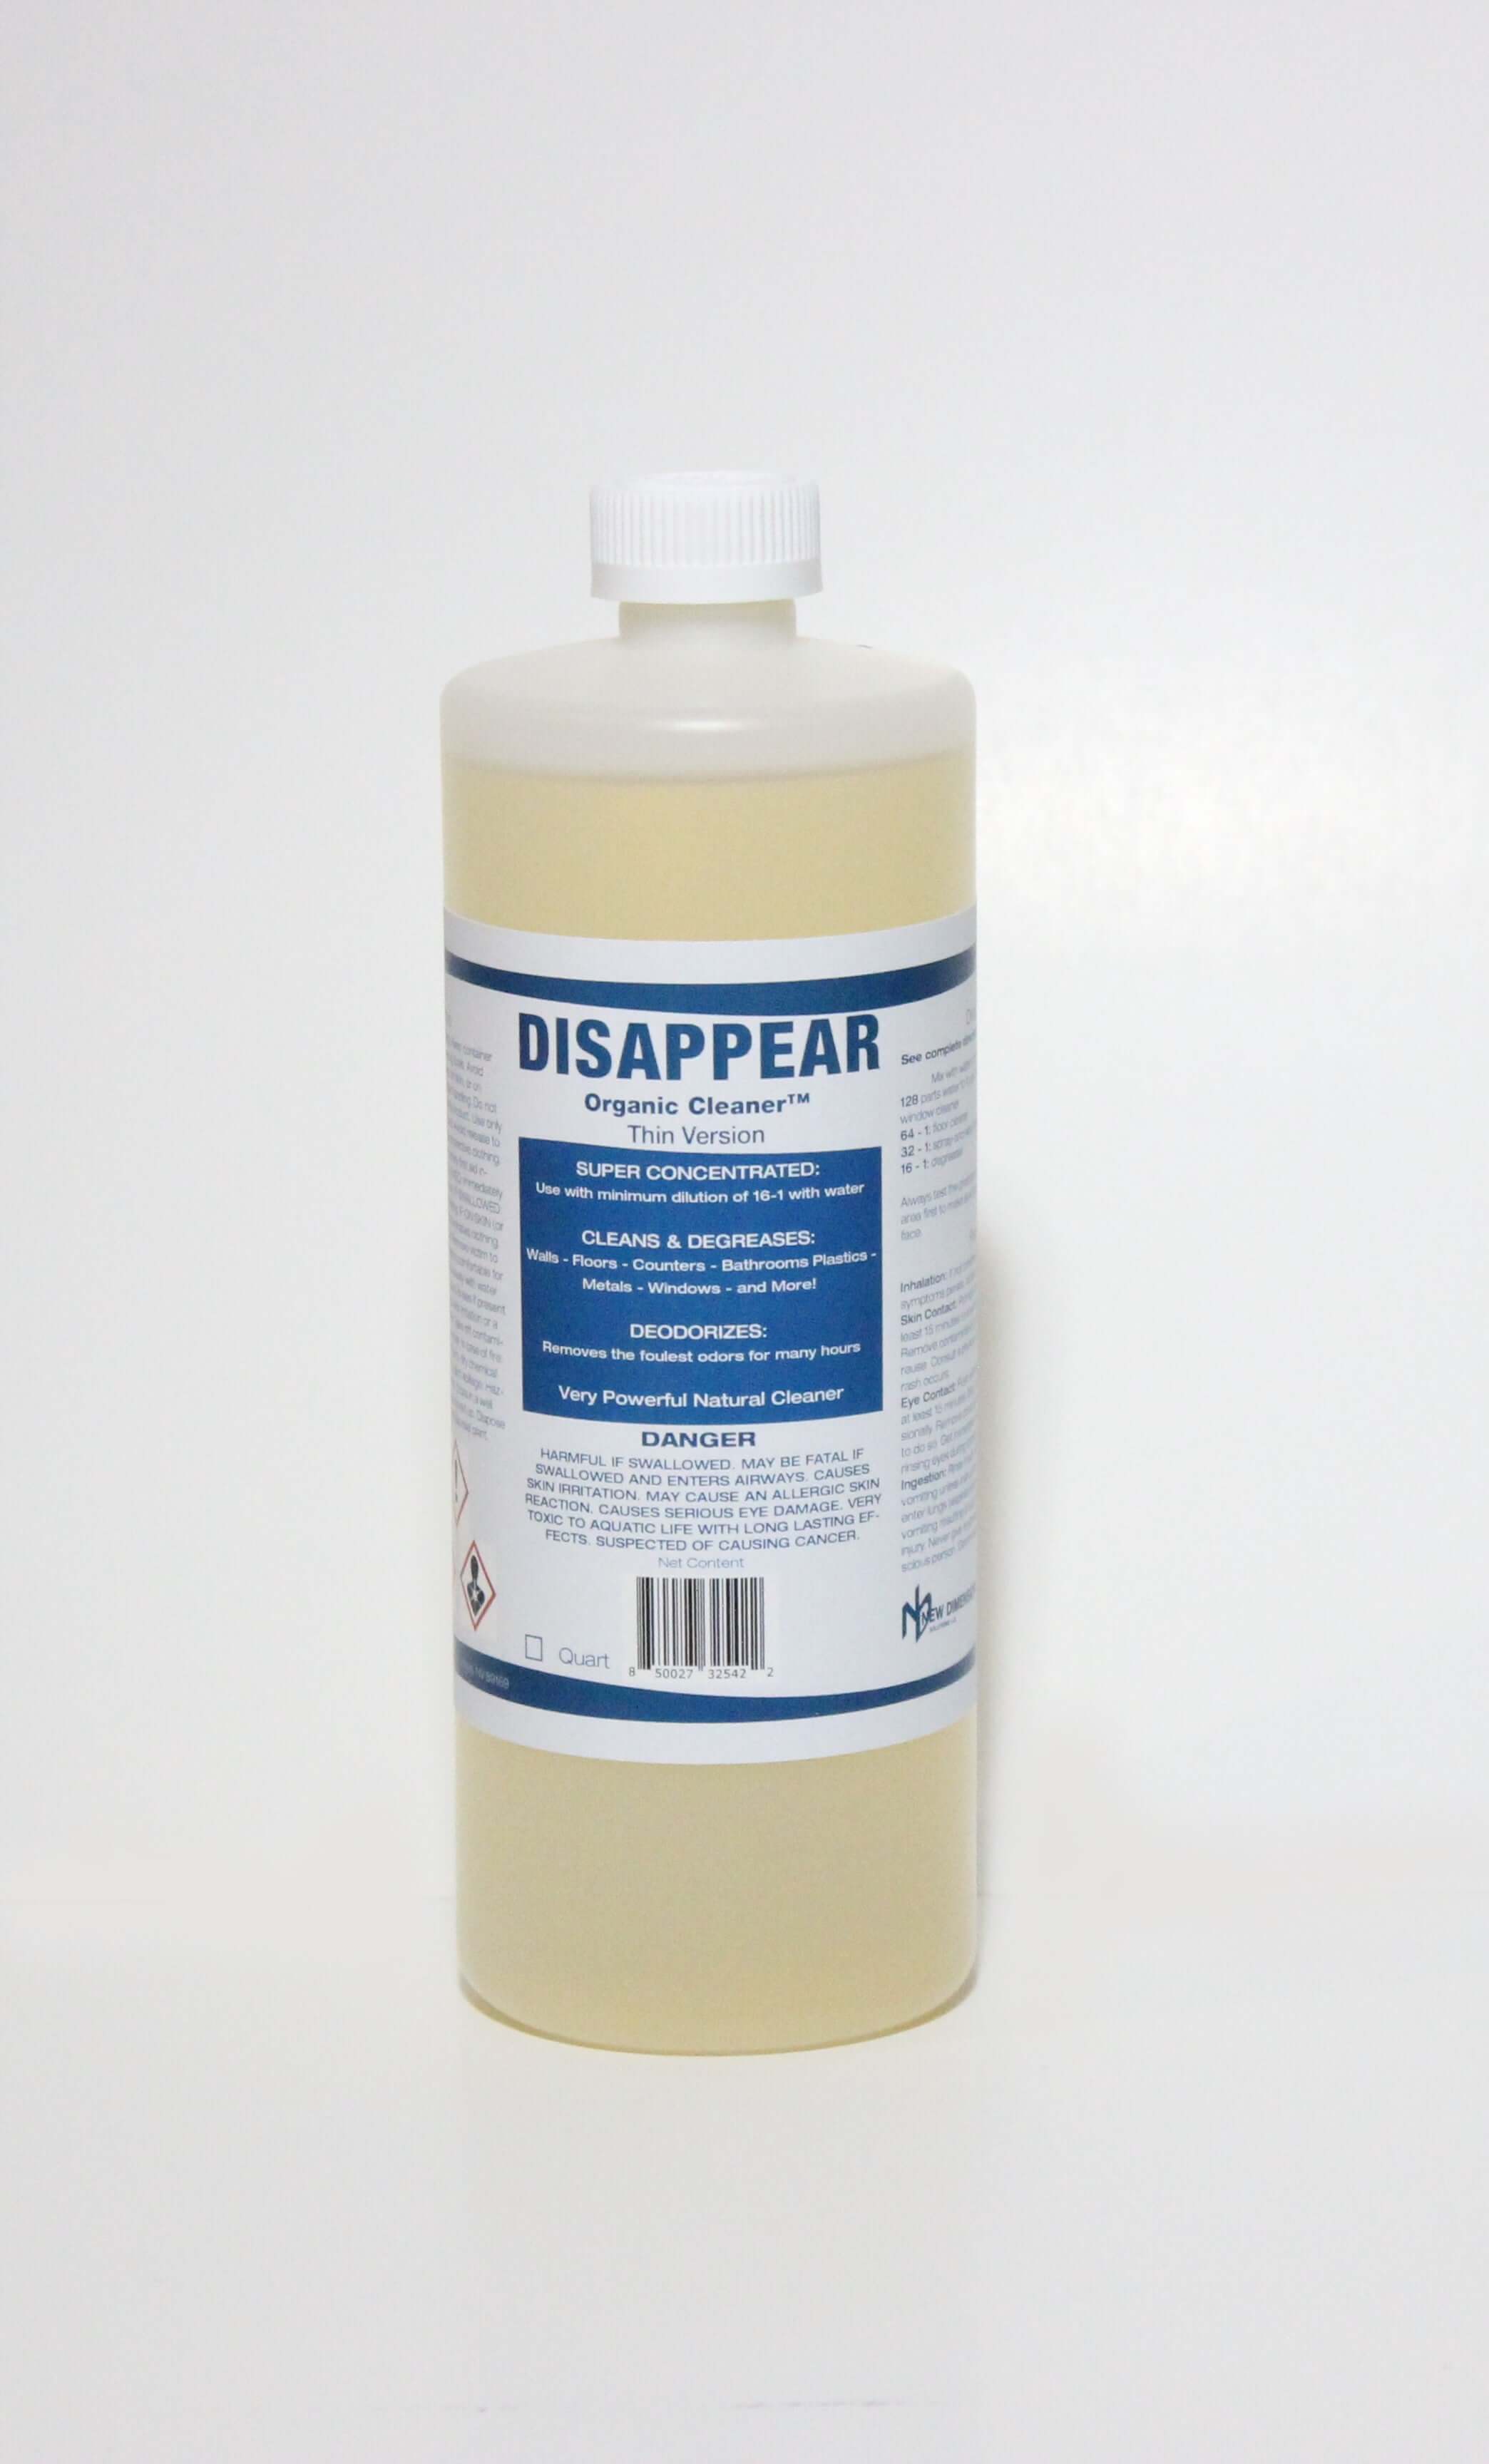 Disappear Organic Natural Cleaner | NEW DIMENSIONS SOLUTIONS, LLC